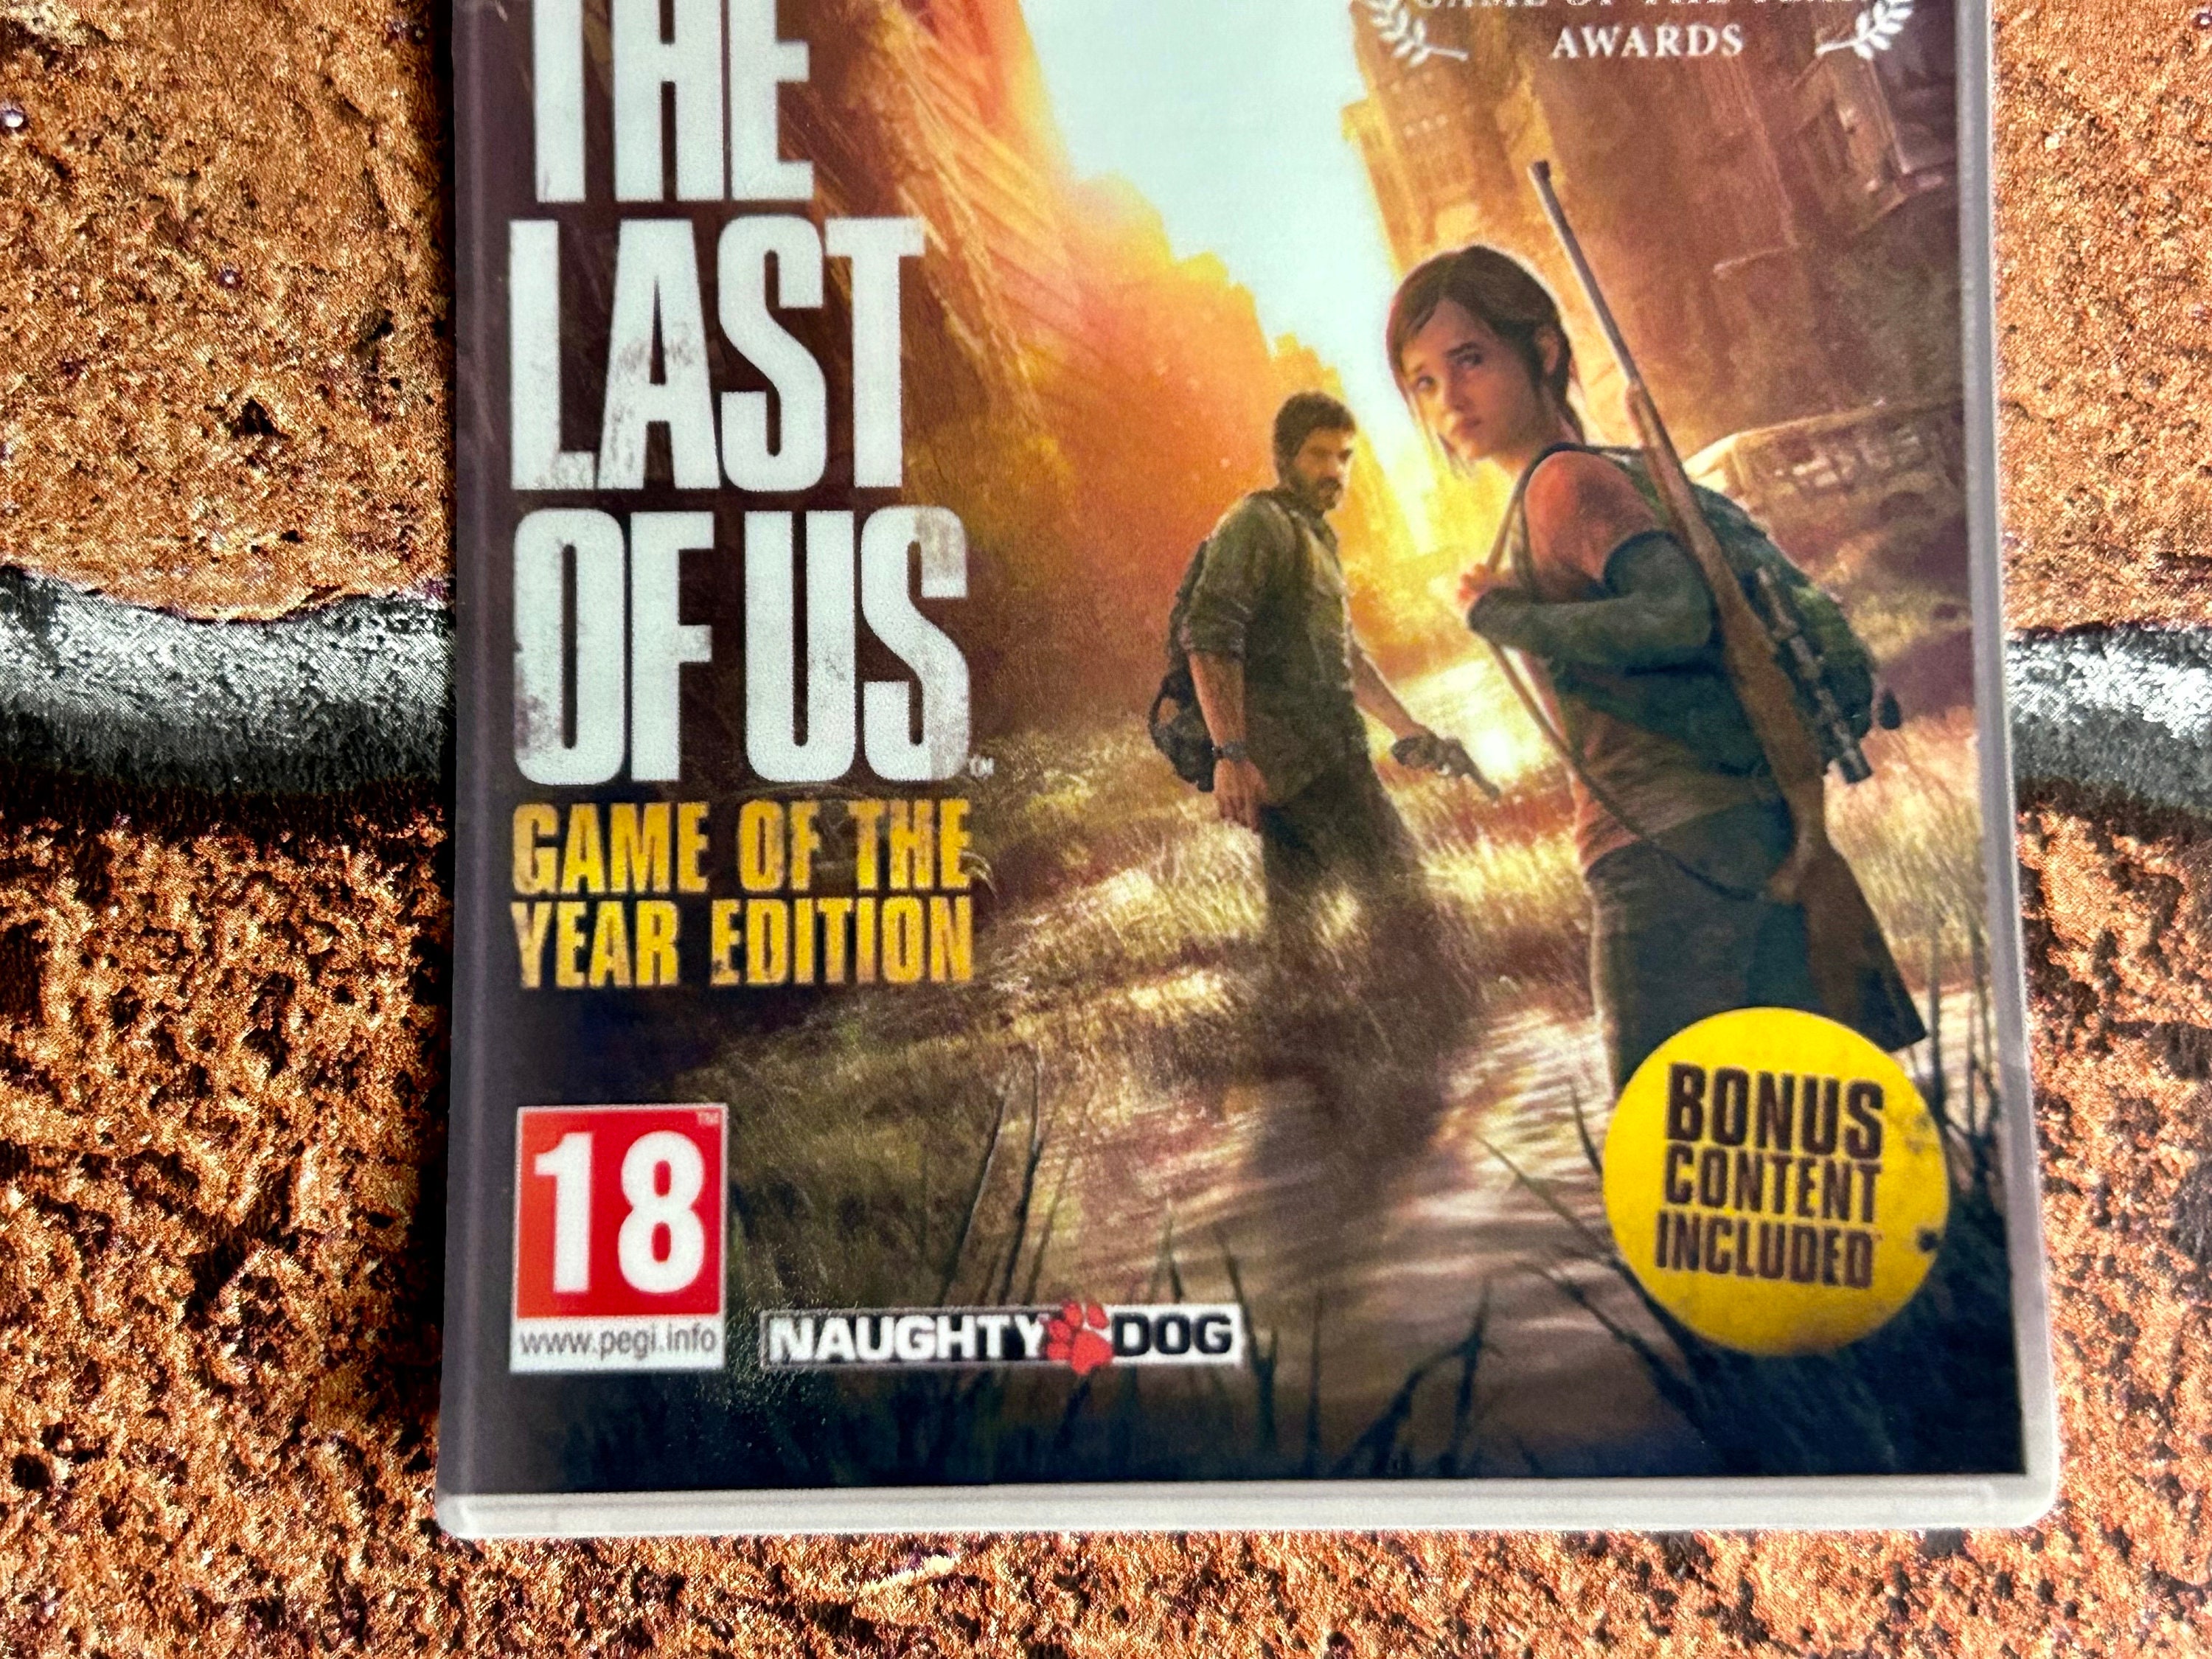 The Last of Us - PS3 – Games A Plunder